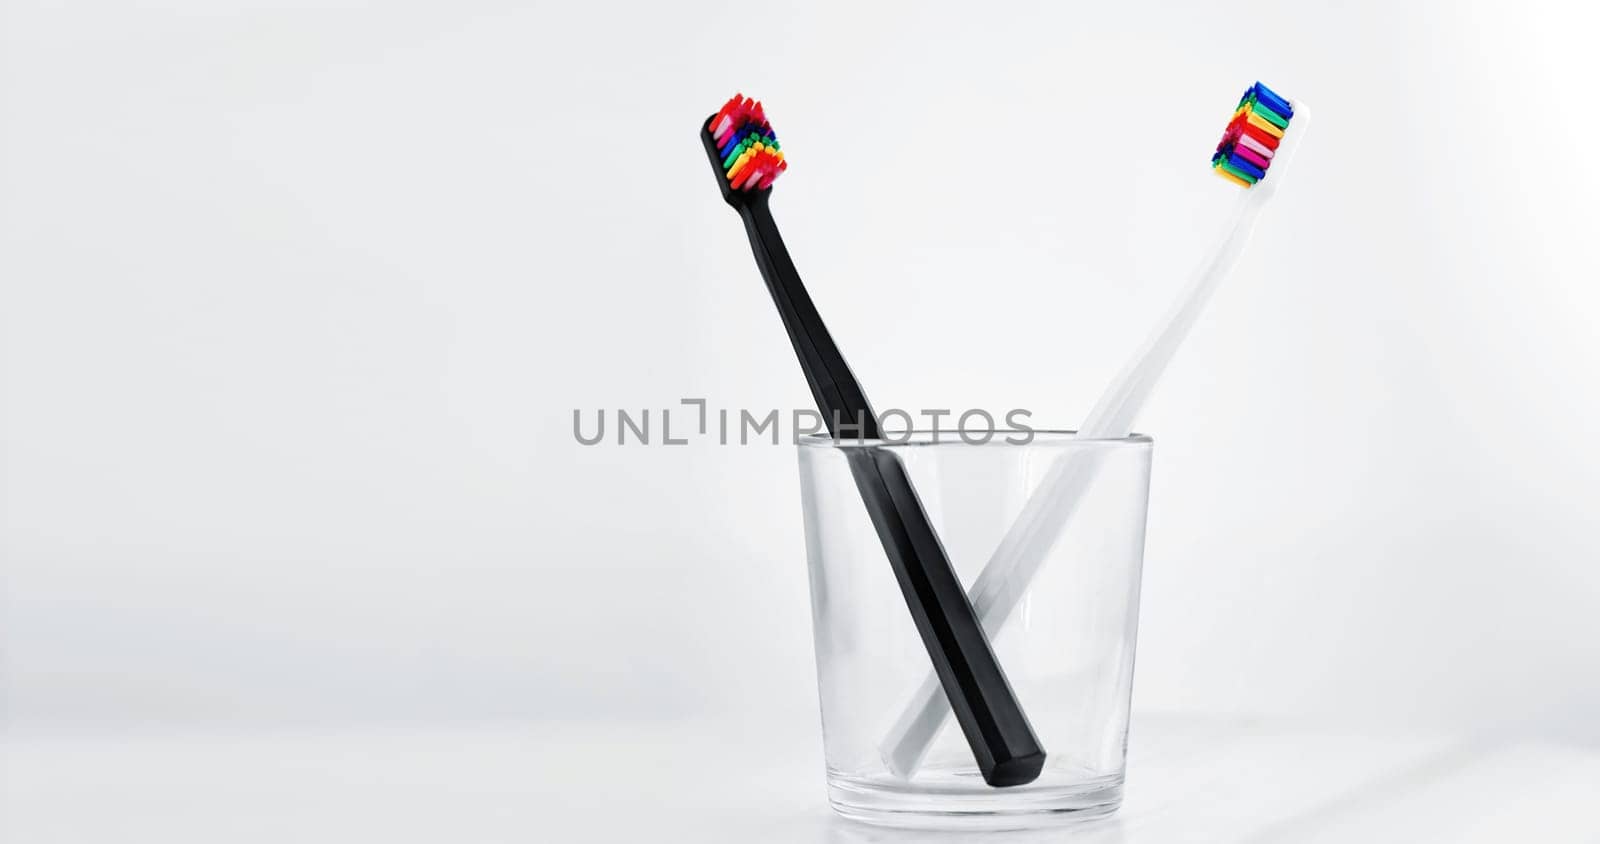 Stylish dental abacus in a glass cup. Black and White toothbrushs with multicolored bristles on white background. Bristles in all colors of the rainbow. Rainbow toothbrush Fashionable oral care by EvgeniyQW